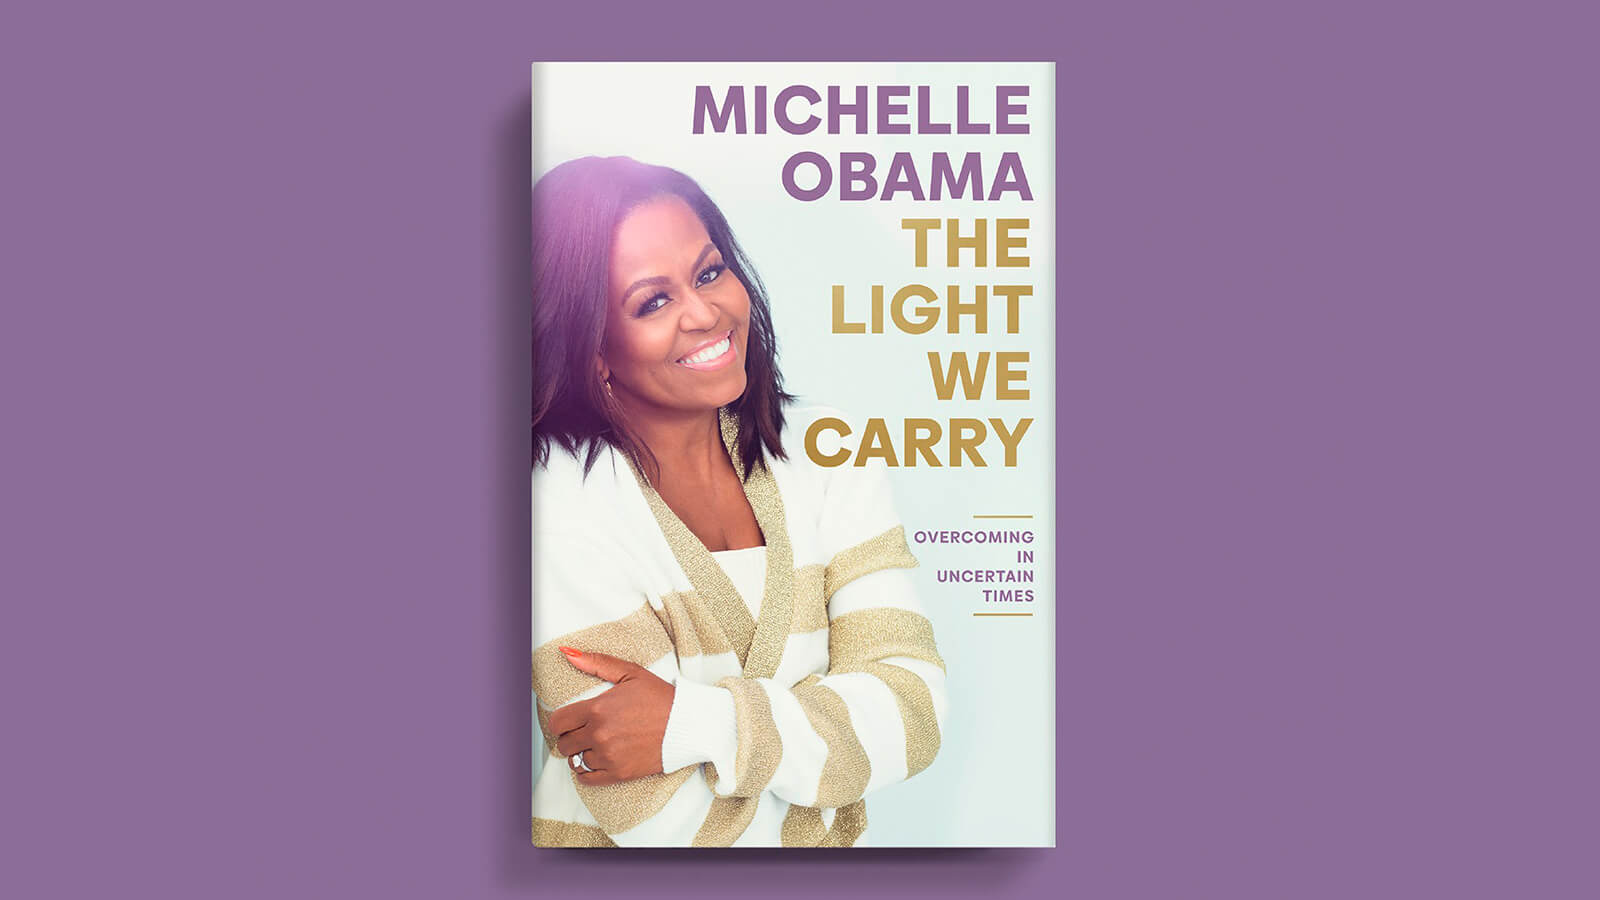 Image of Michelle Obama's book The Light We Carry